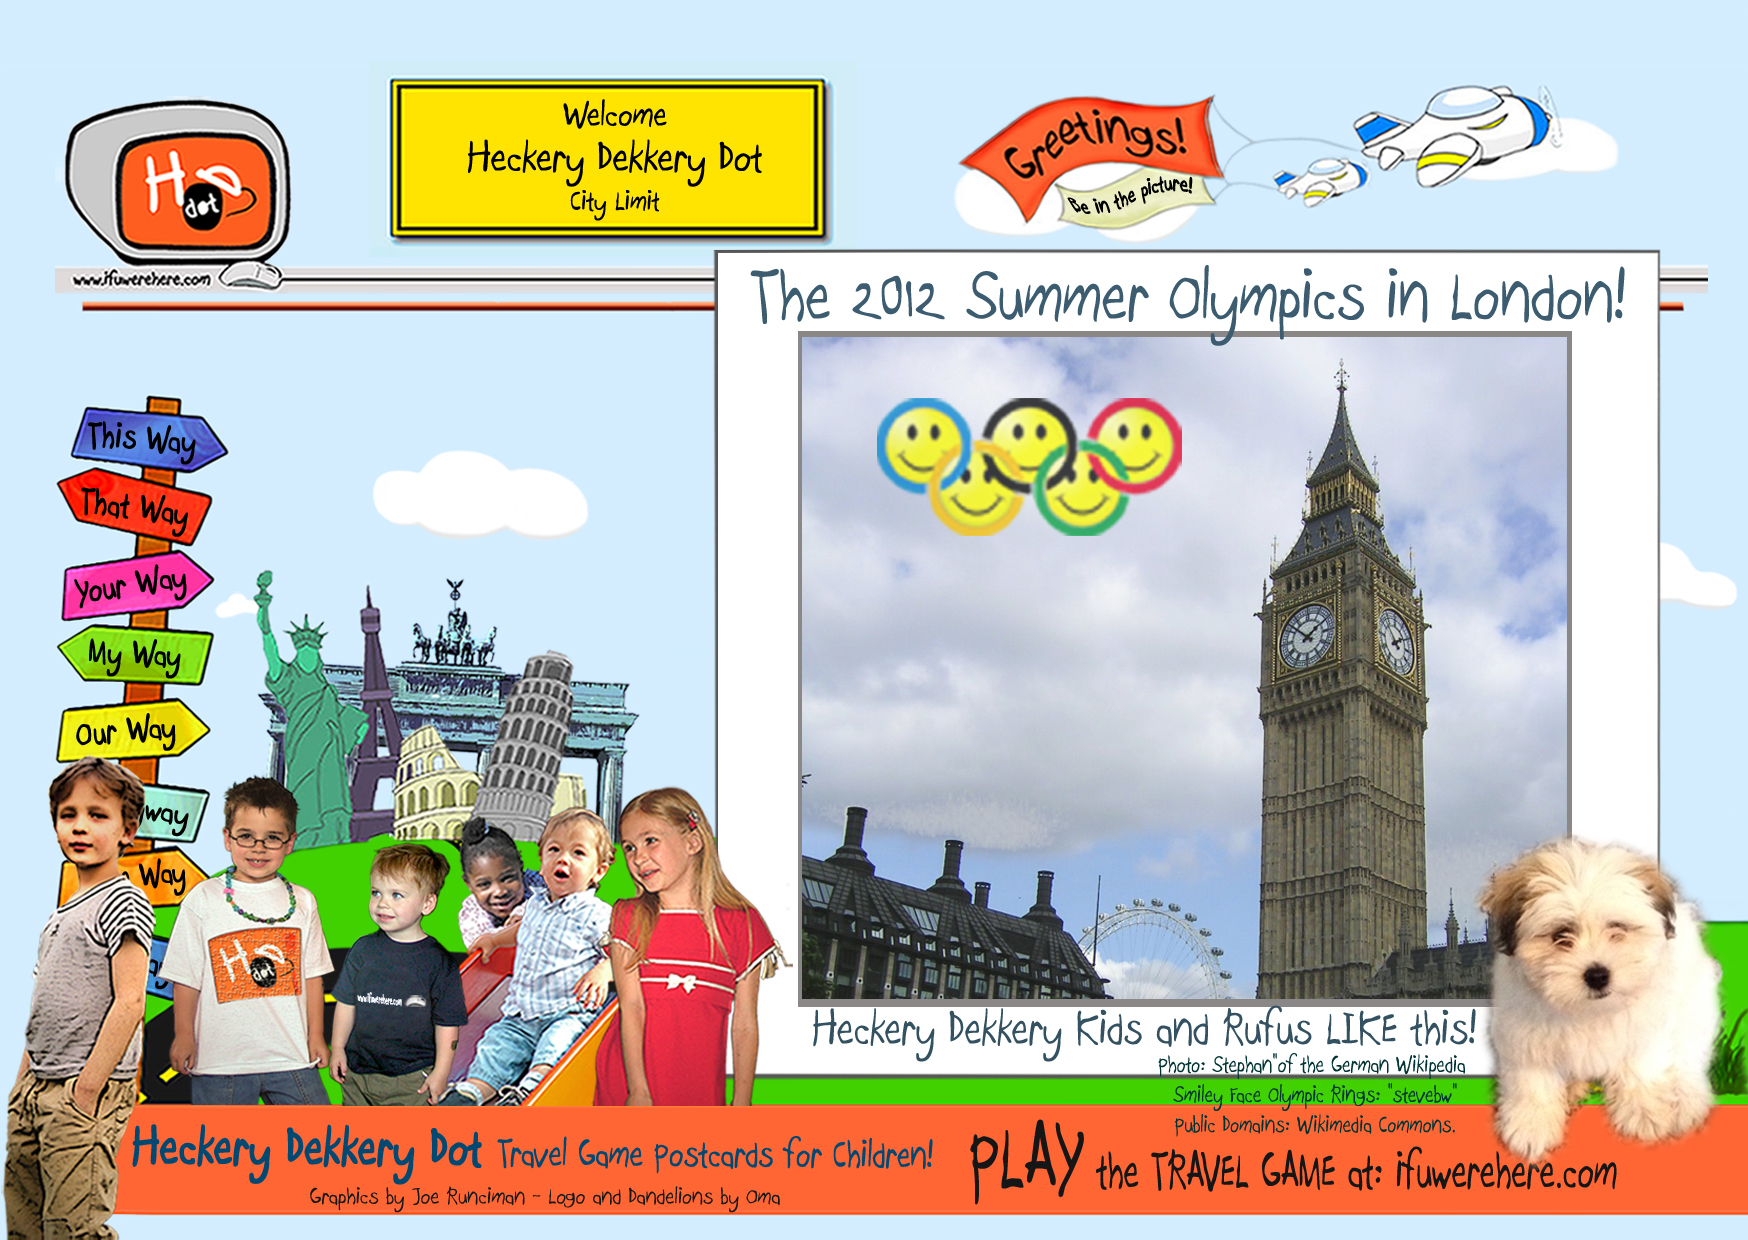 The 2012 Summer Olympics in London